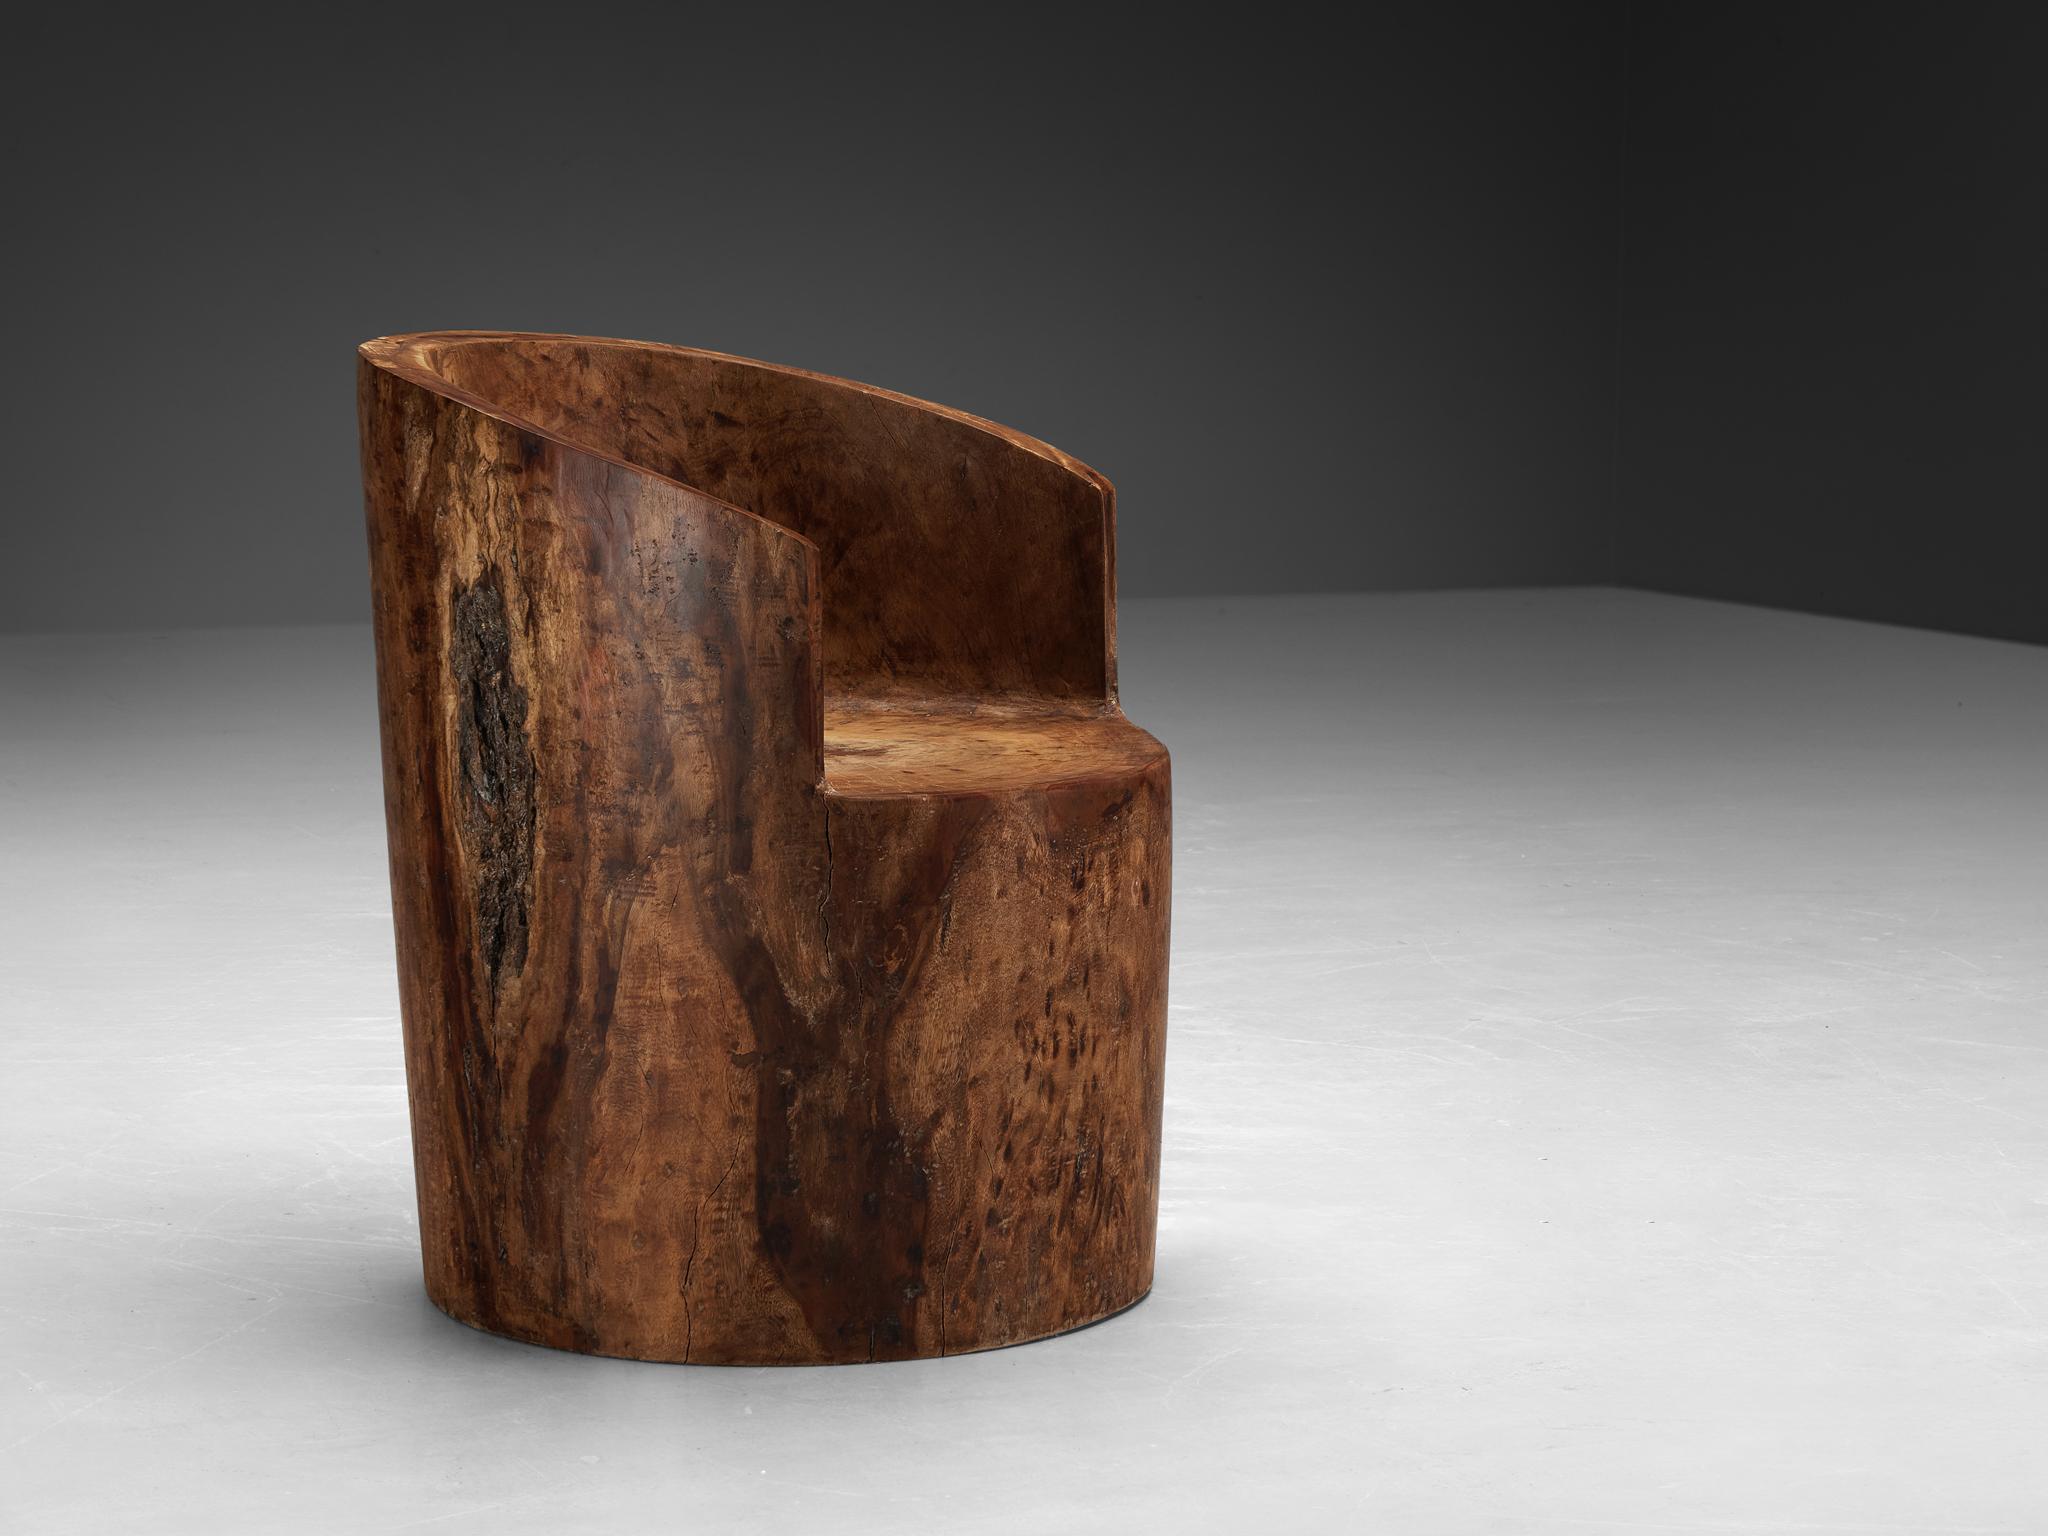 José Zanine Caldas, hand-sculpted chair, model ‘Pilão’, Brazilian hardwood, Brazil, 1975

This exquisite hand-carved chair exemplifies the core principles embodied by José Zanine Caldas: a profound love for nature, particularly wood. Crafted with